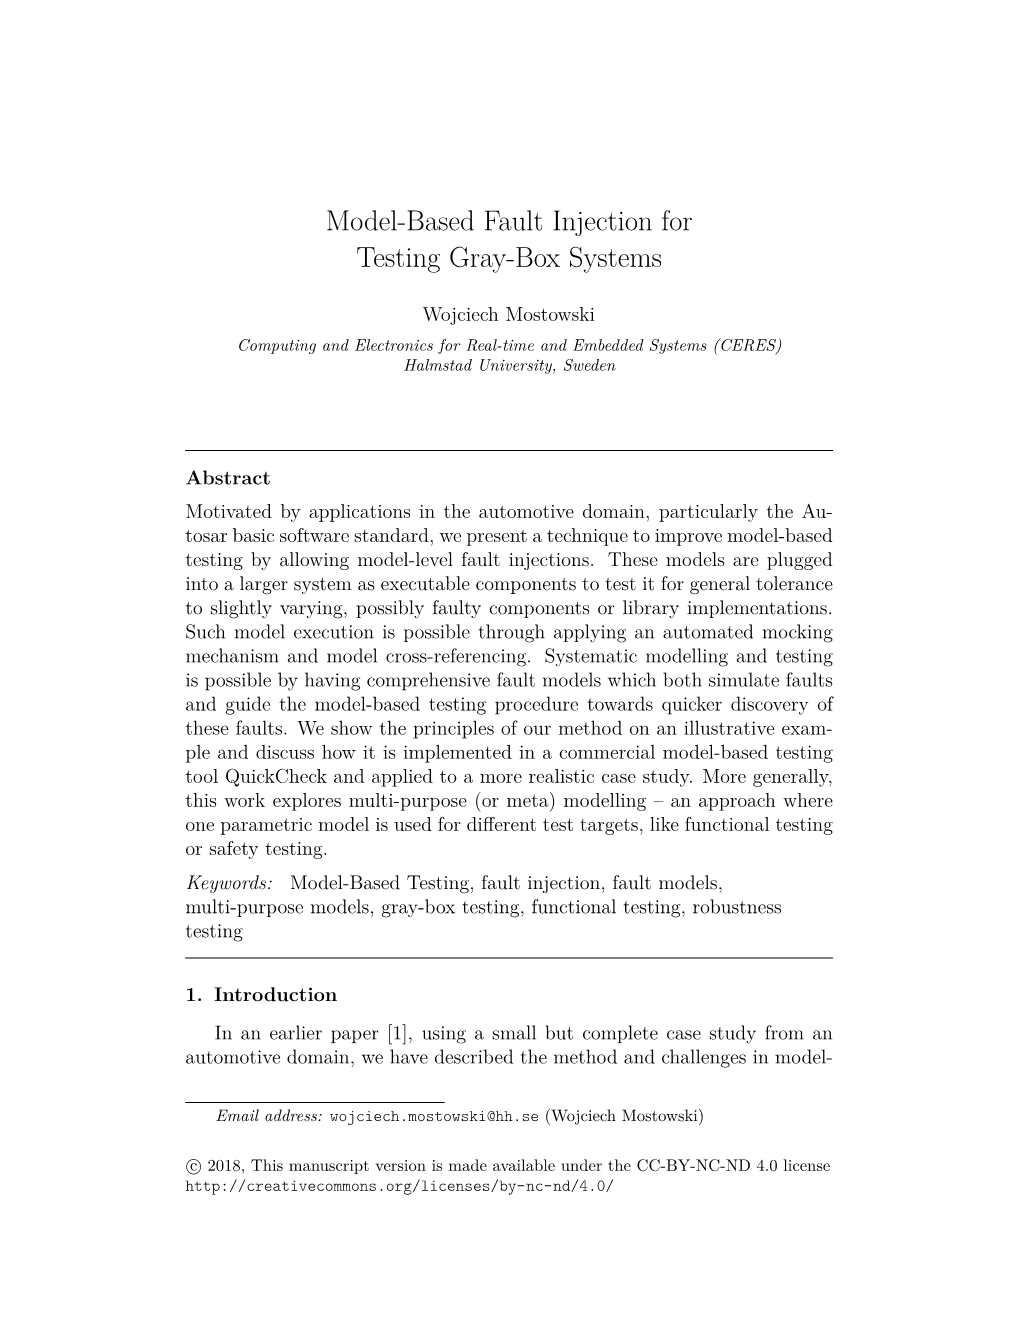 Model-Based Fault Injection for Testing Gray-Box Systems